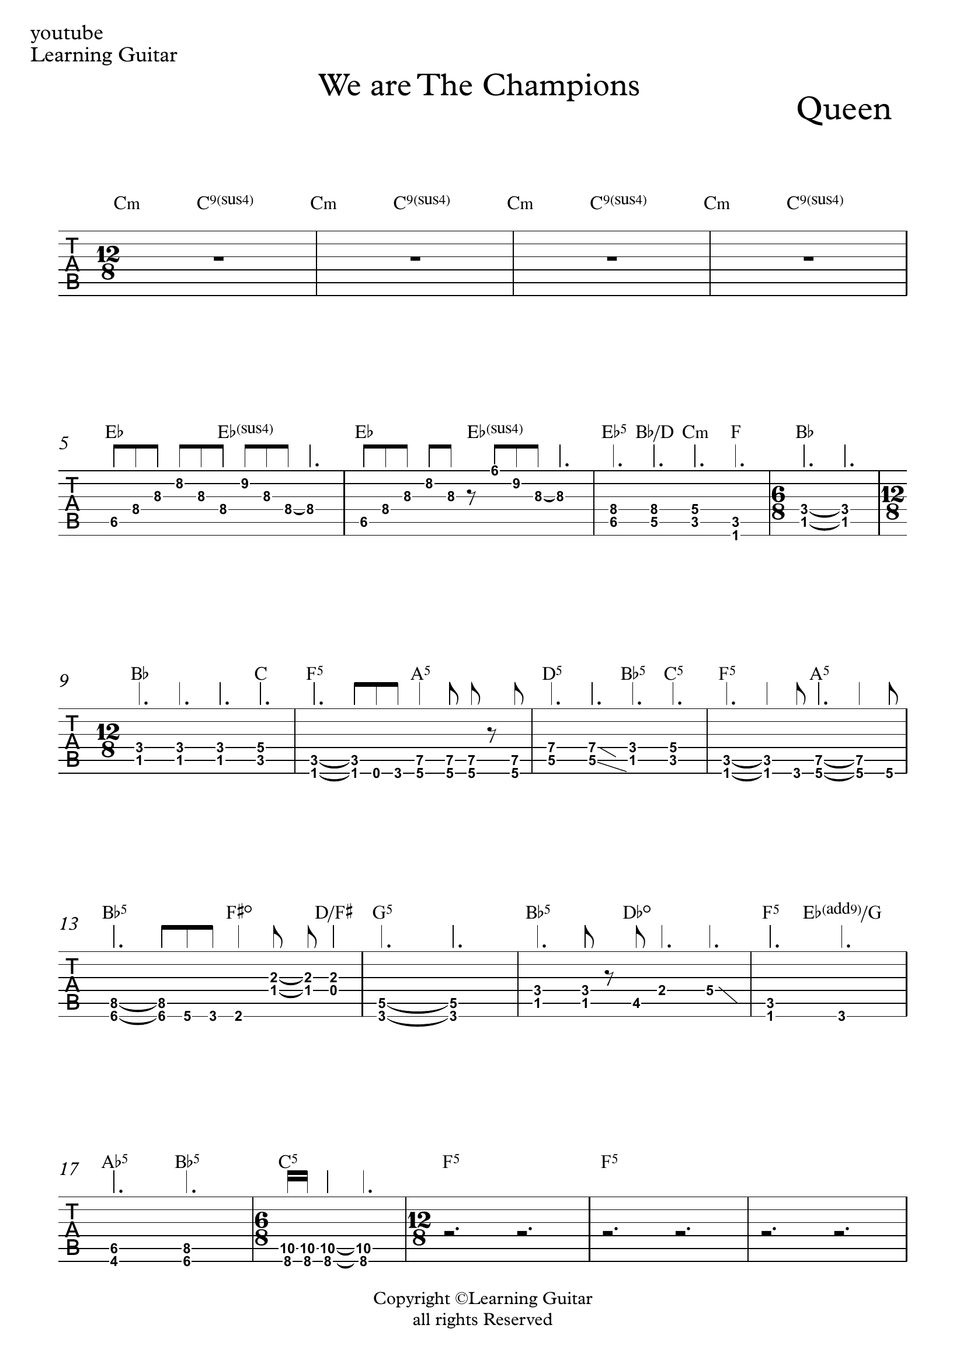 Print industri Foreman Queen - We Are The Champions (Guitar TAB) Sheets by Learning Guitar